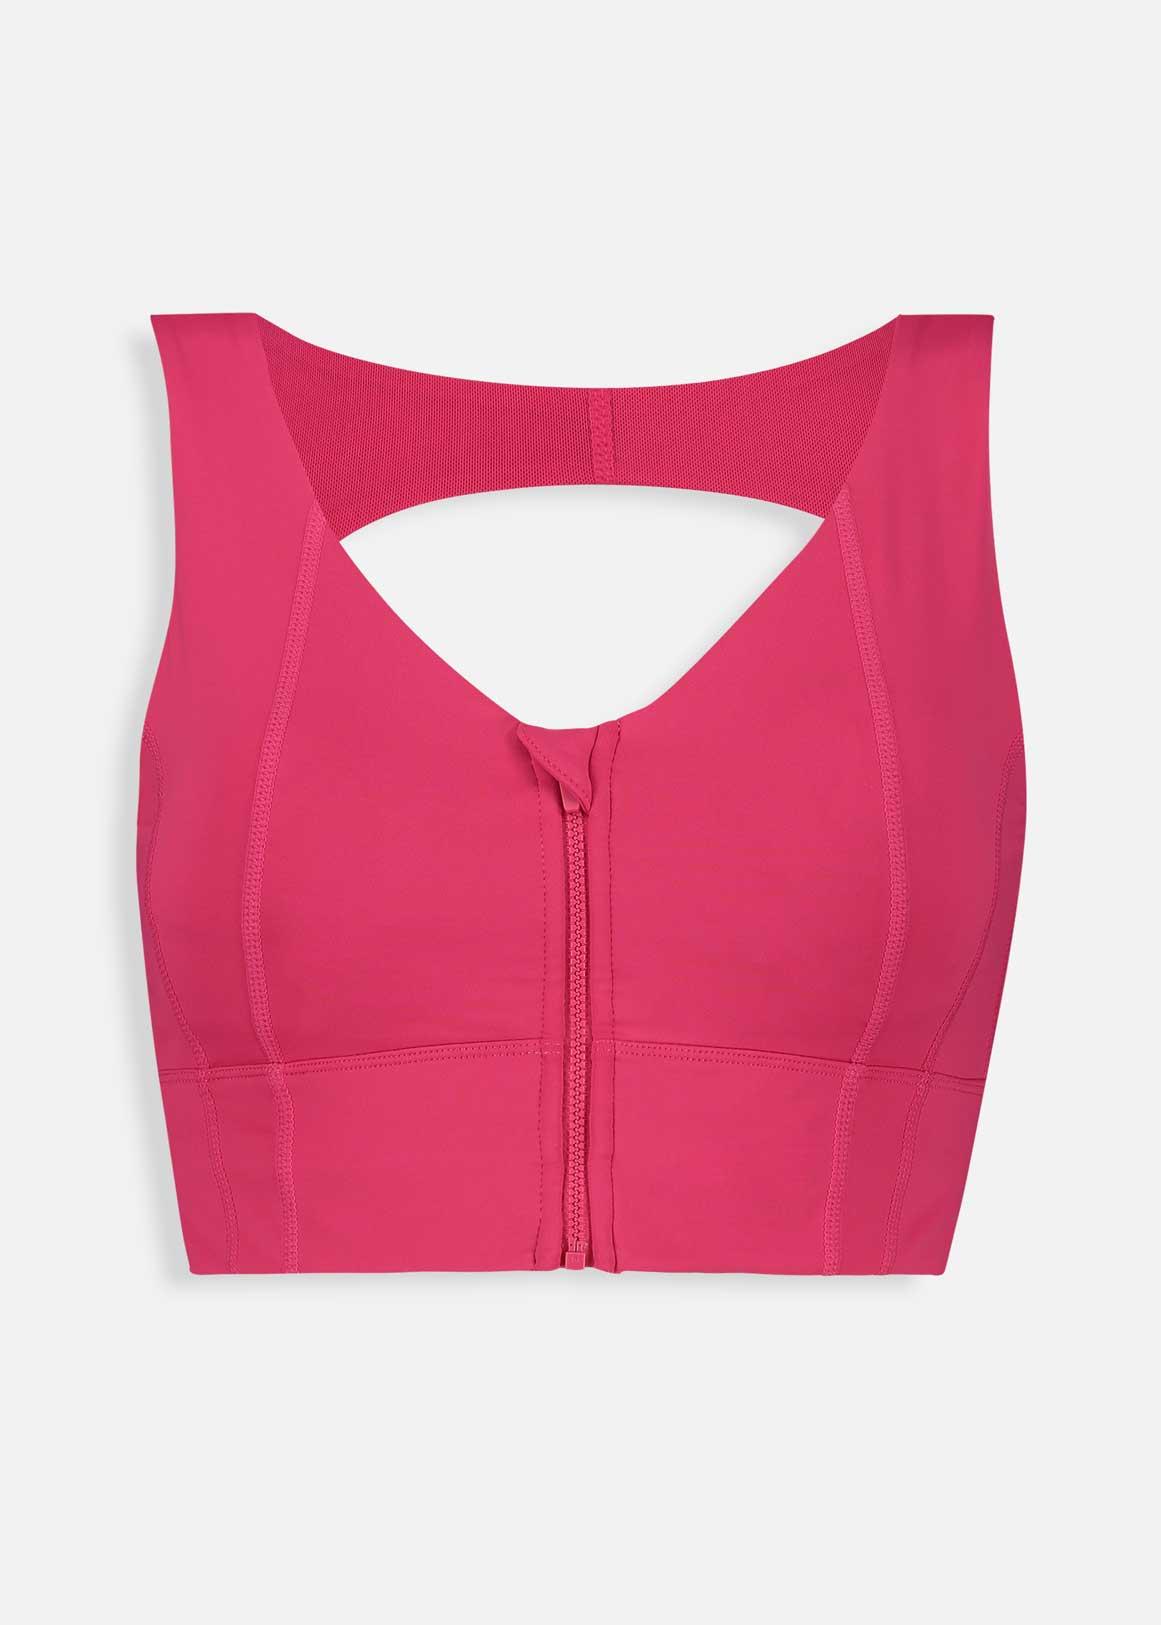 The Score Brockville - Lole 2 pack sports bras for only $14+ tax!!!!  AMAZING!!!!!